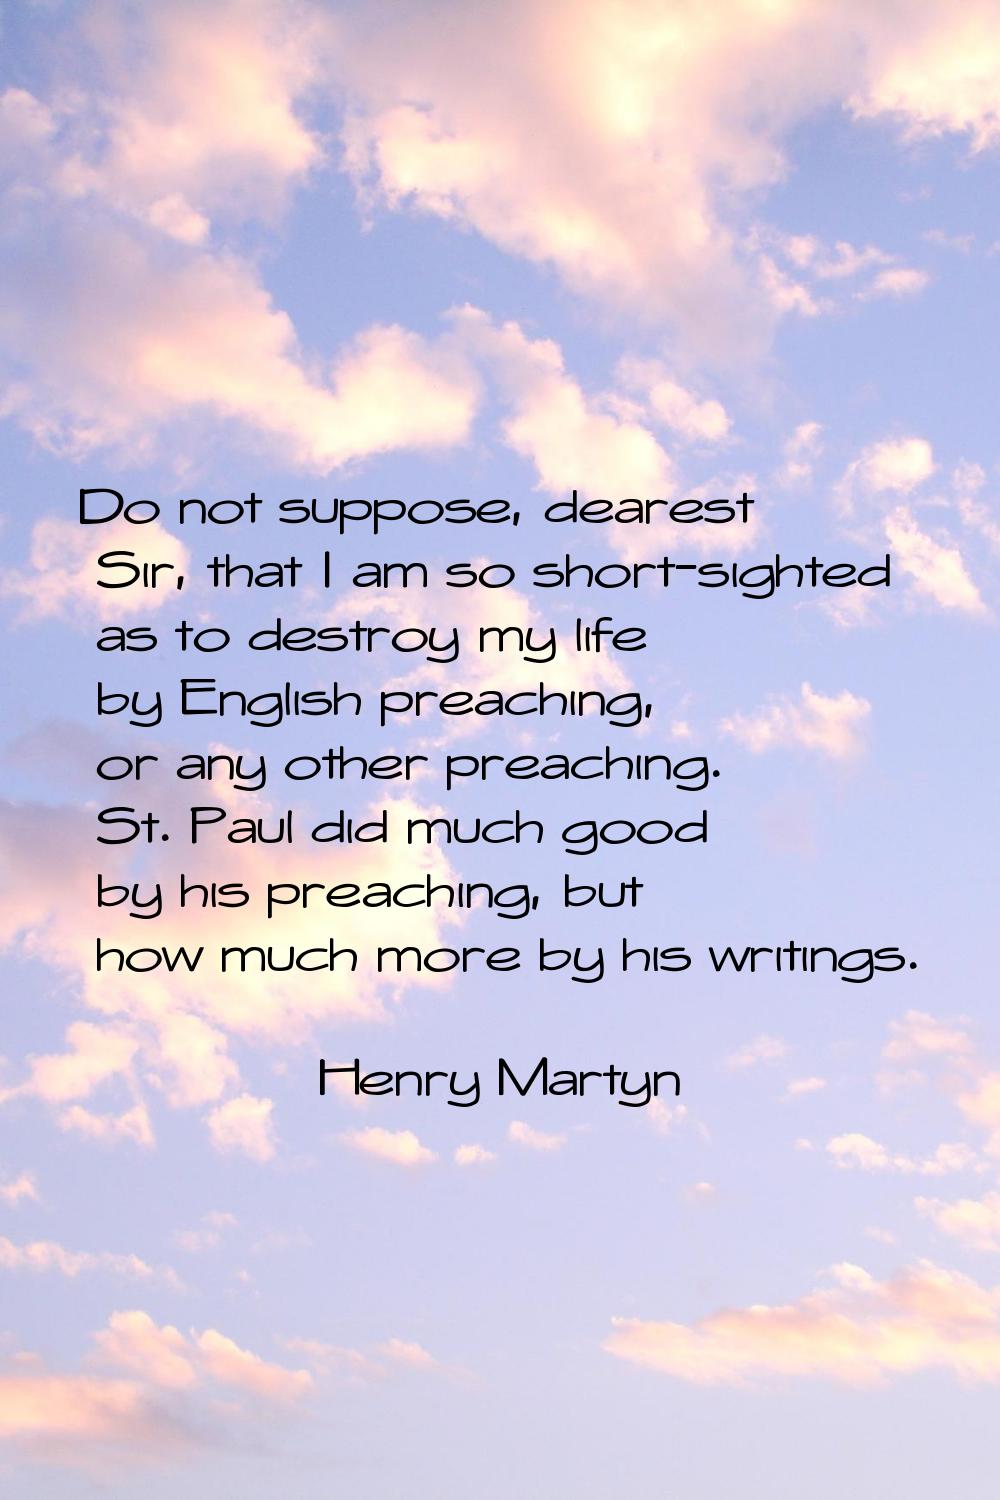 Do not suppose, dearest Sir, that I am so short-sighted as to destroy my life by English preaching,